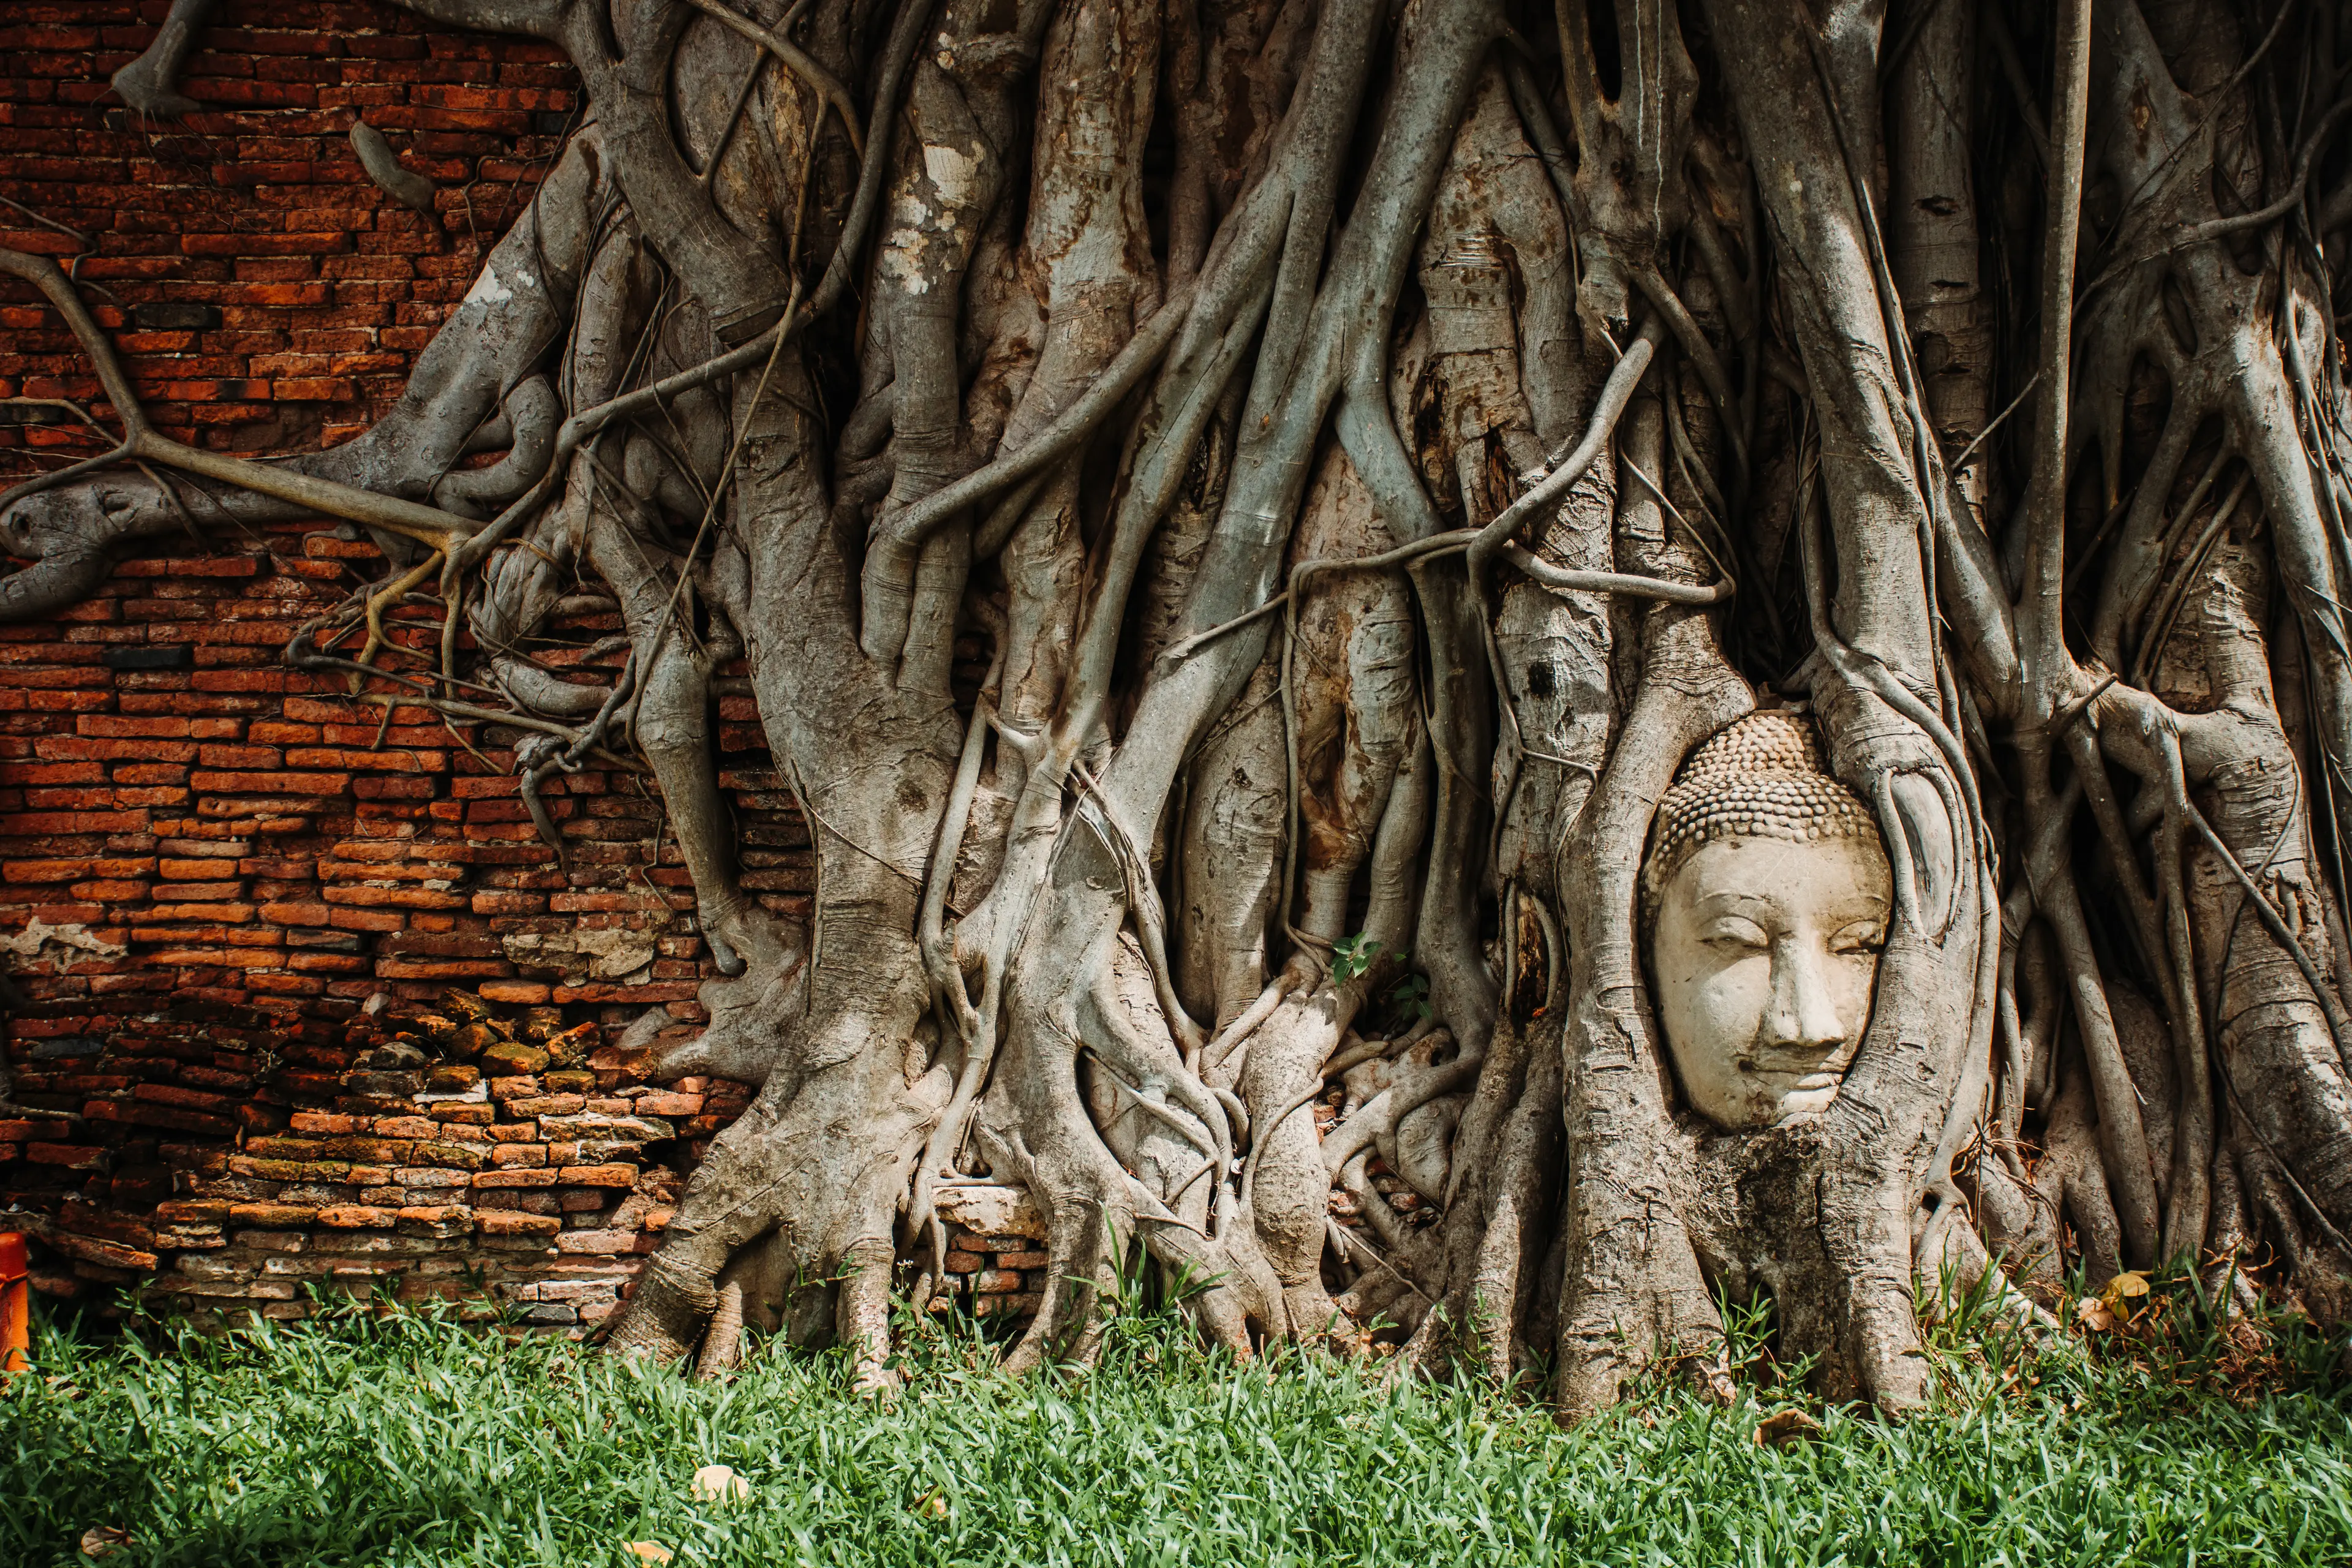 Ayutthaya Buddha head trapped in bodhi tree roots